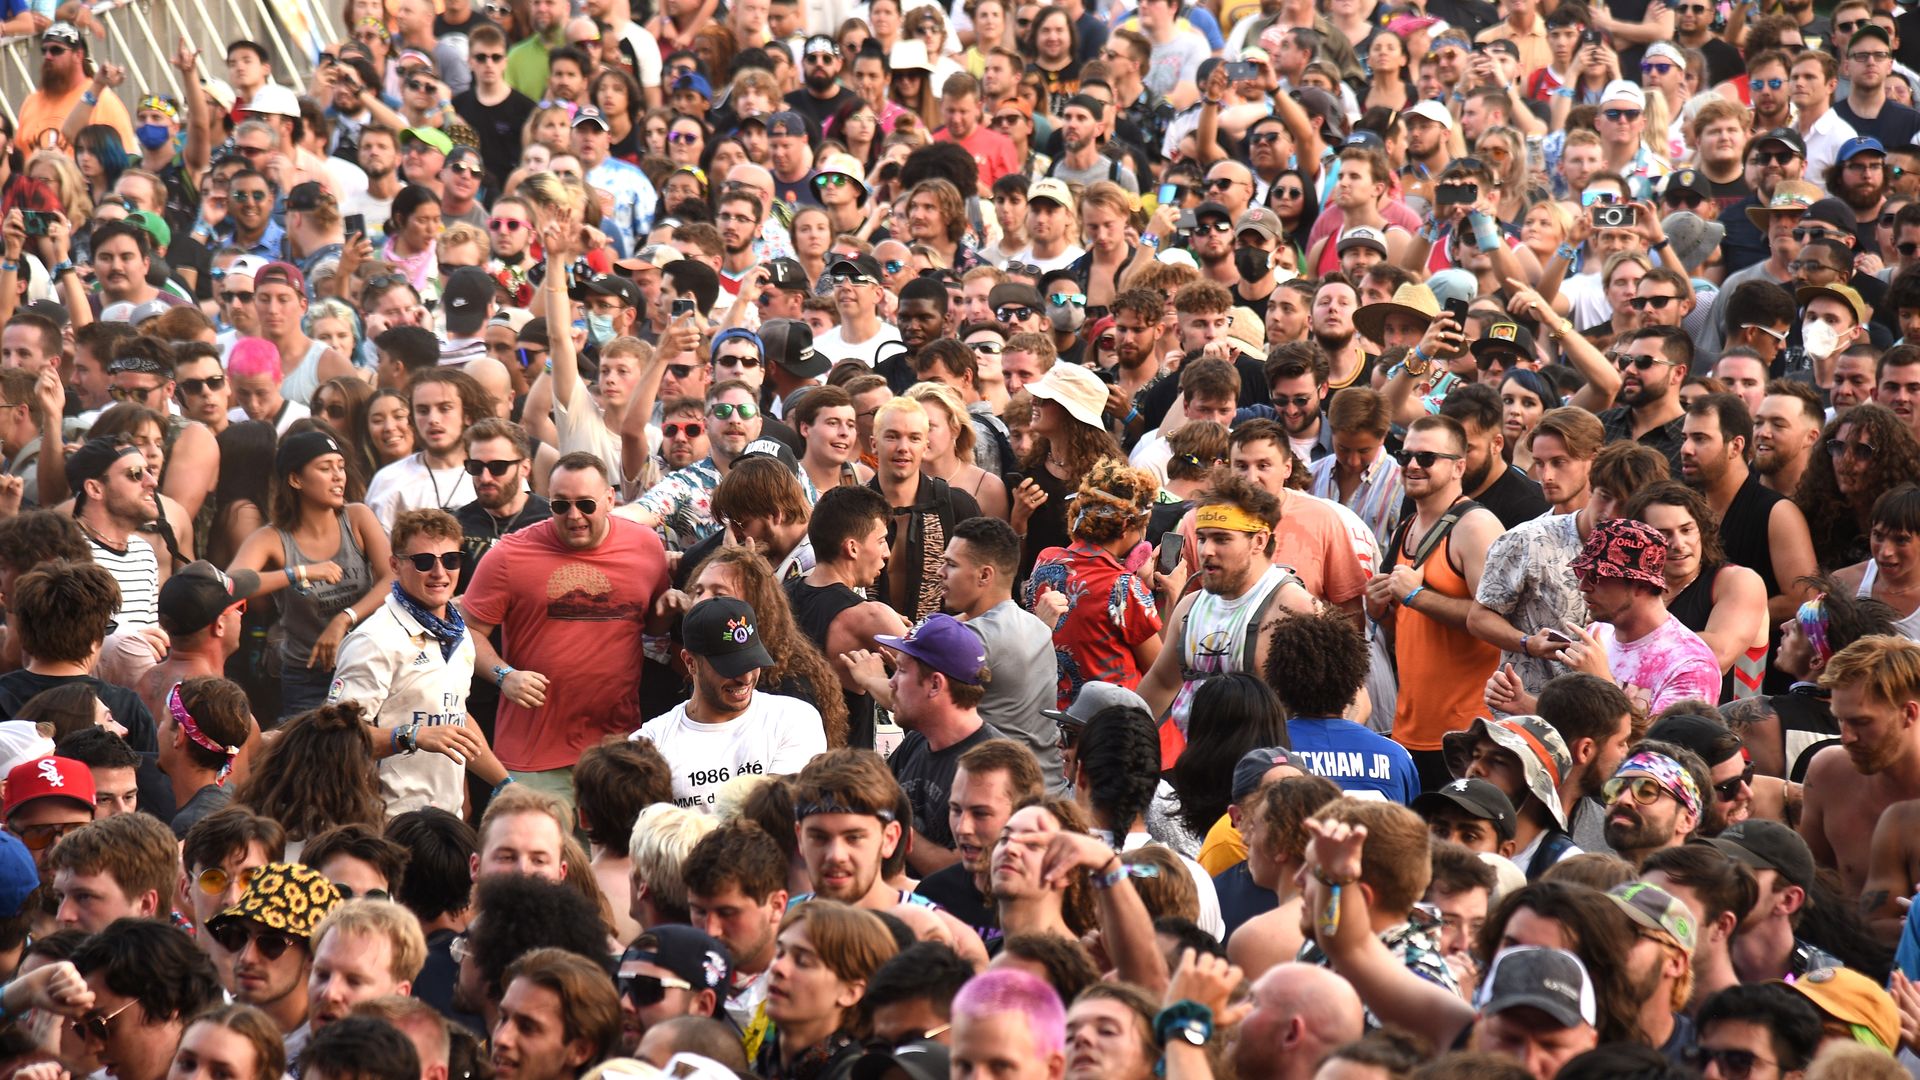 Picture of the crowd in Lollapalooza in 2021